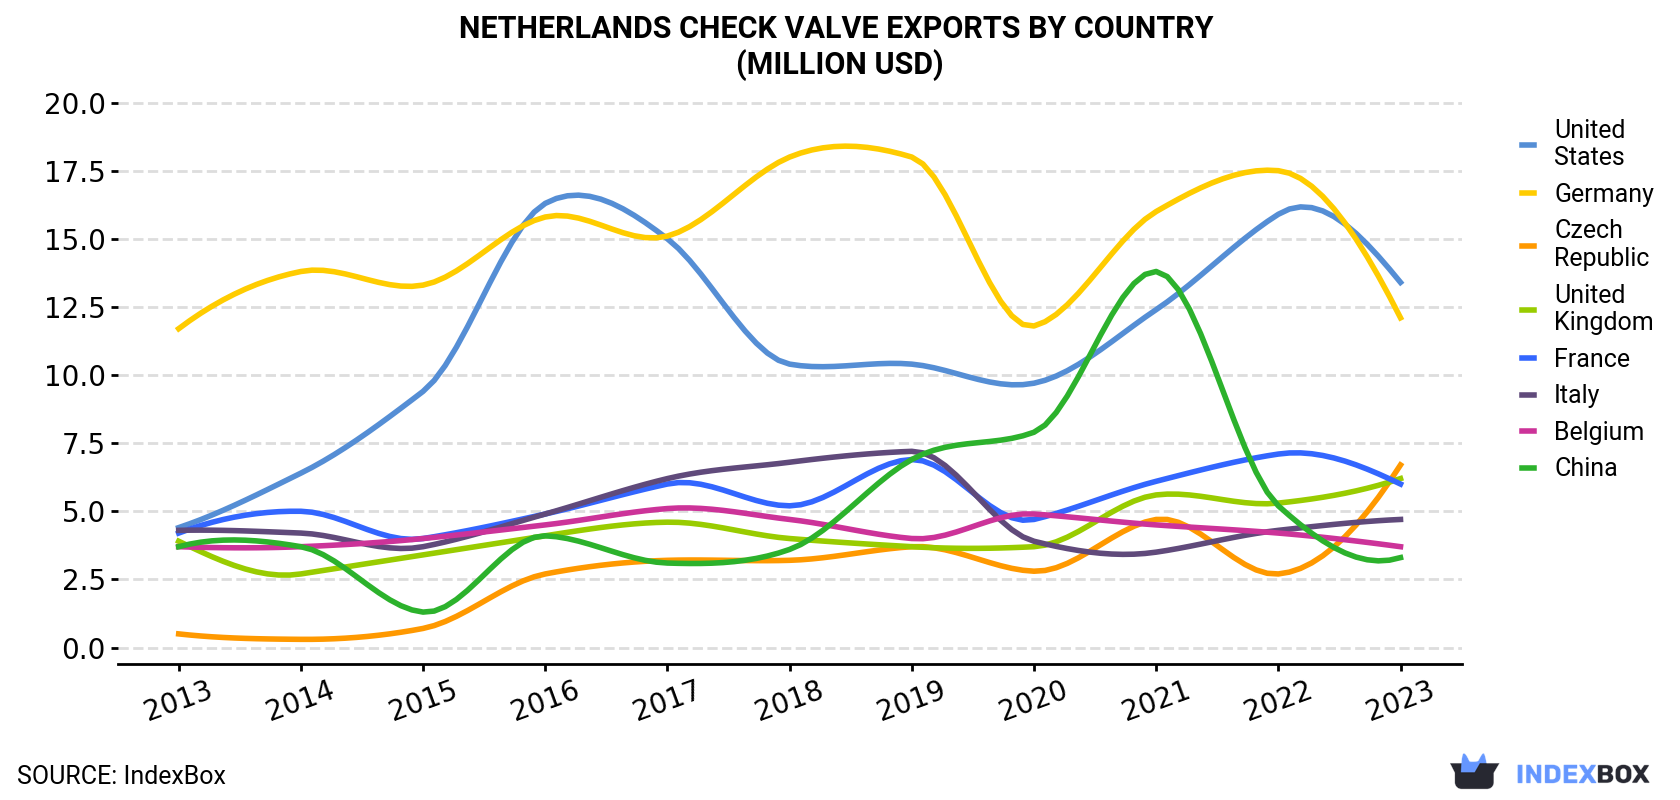 Netherlands Check Valve Exports By Country (Million USD)